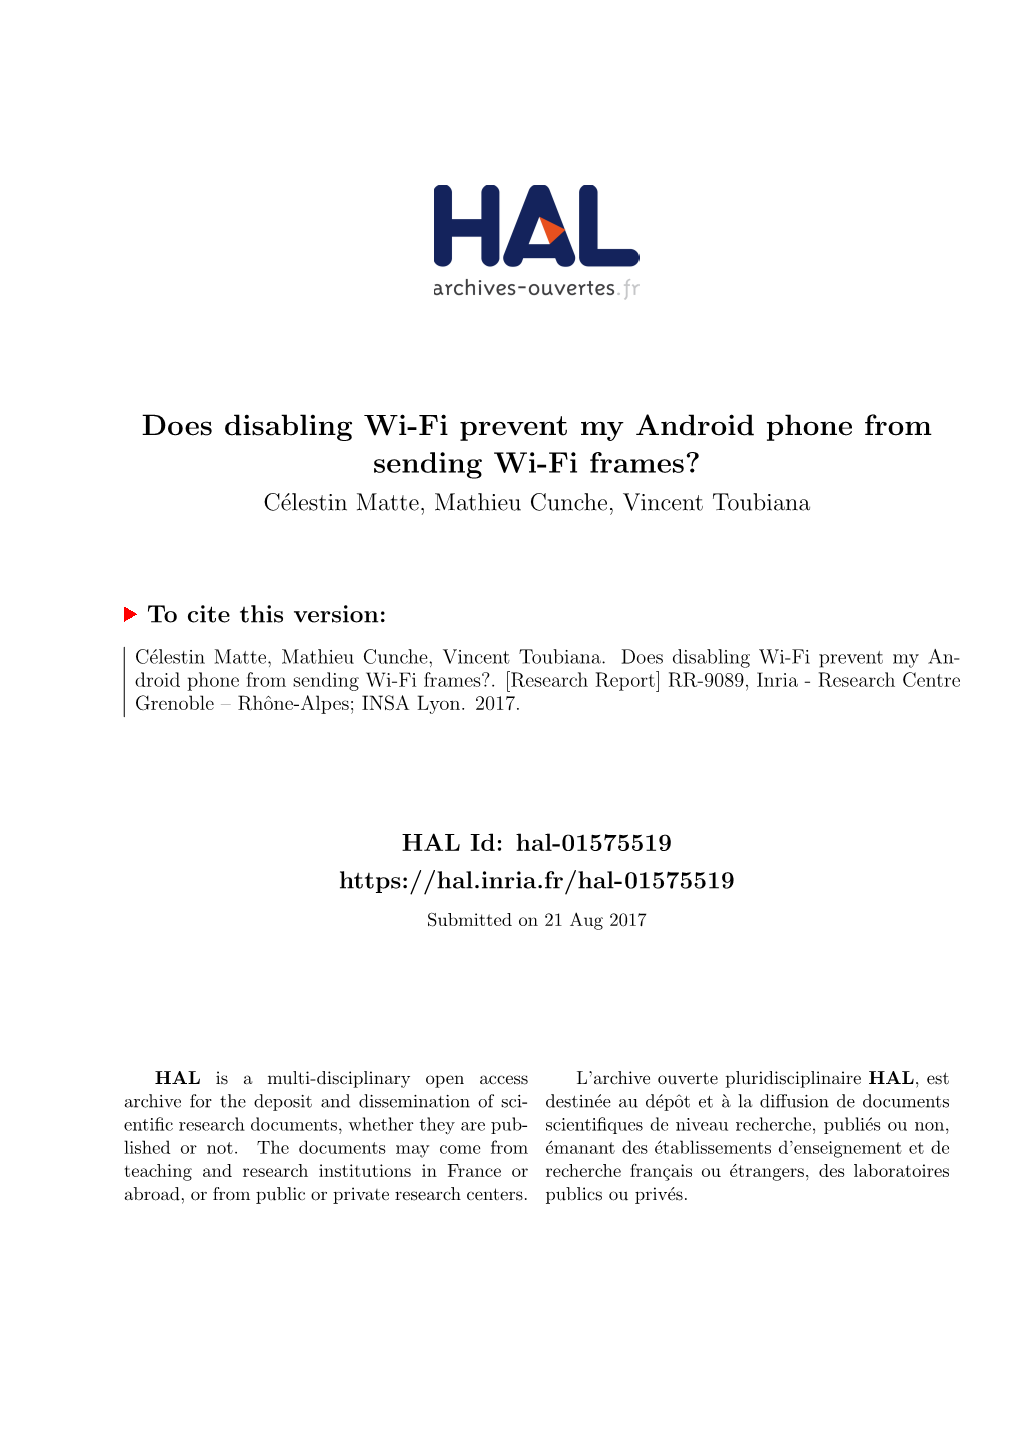 Does Disabling Wi-Fi Prevent My Android Phone from Sending Wi-Fi Frames? C´Elestinmatte, Mathieu Cunche, Vincent Toubiana